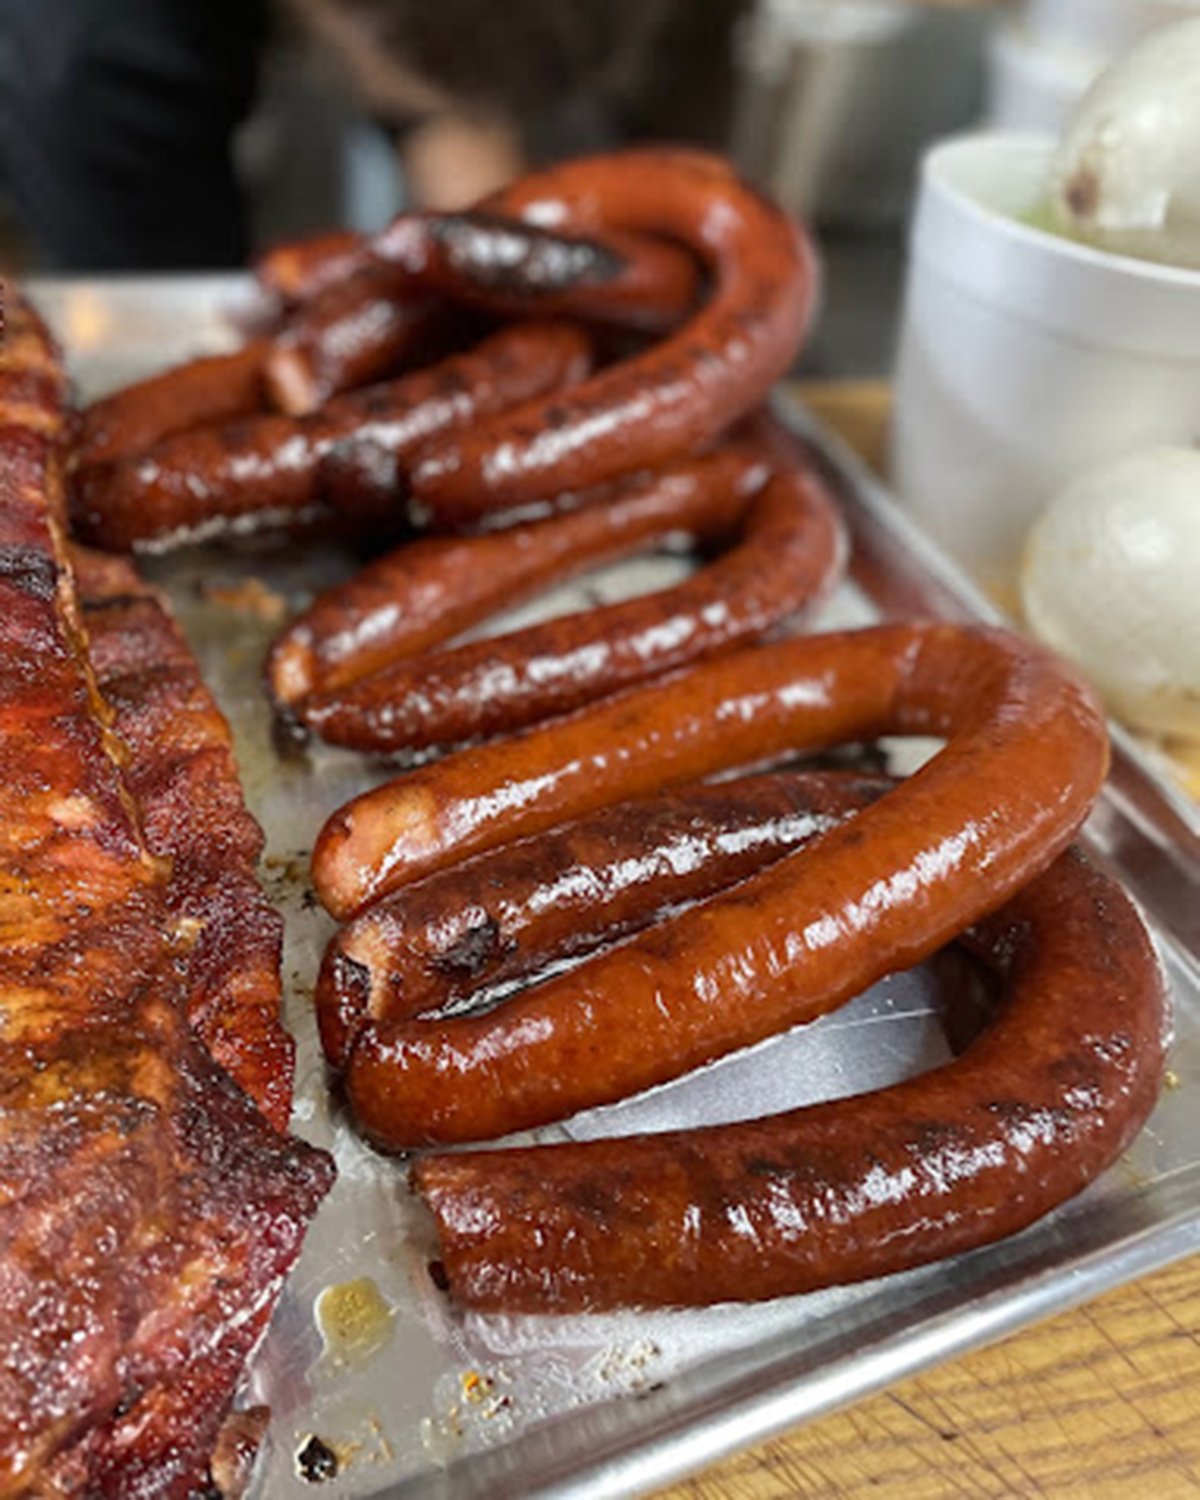 A picture of smoked link sausage from Kenny's Smoke Shack & BBQ in Evansville, IN